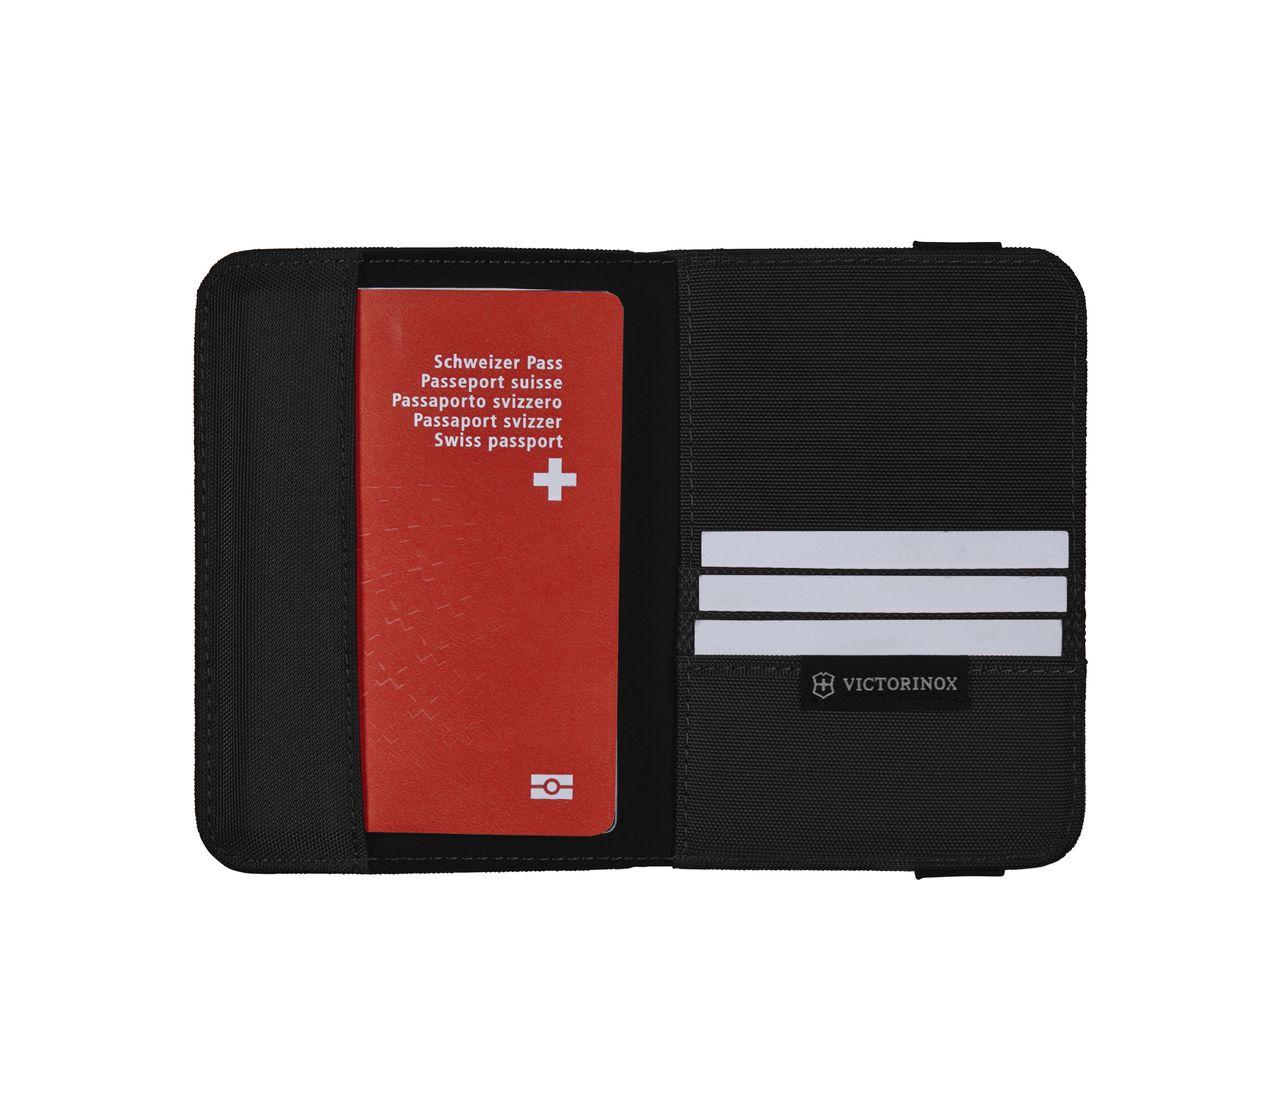 Travel Accessories 5.0 Passport Holder with RIFD Protection-610606